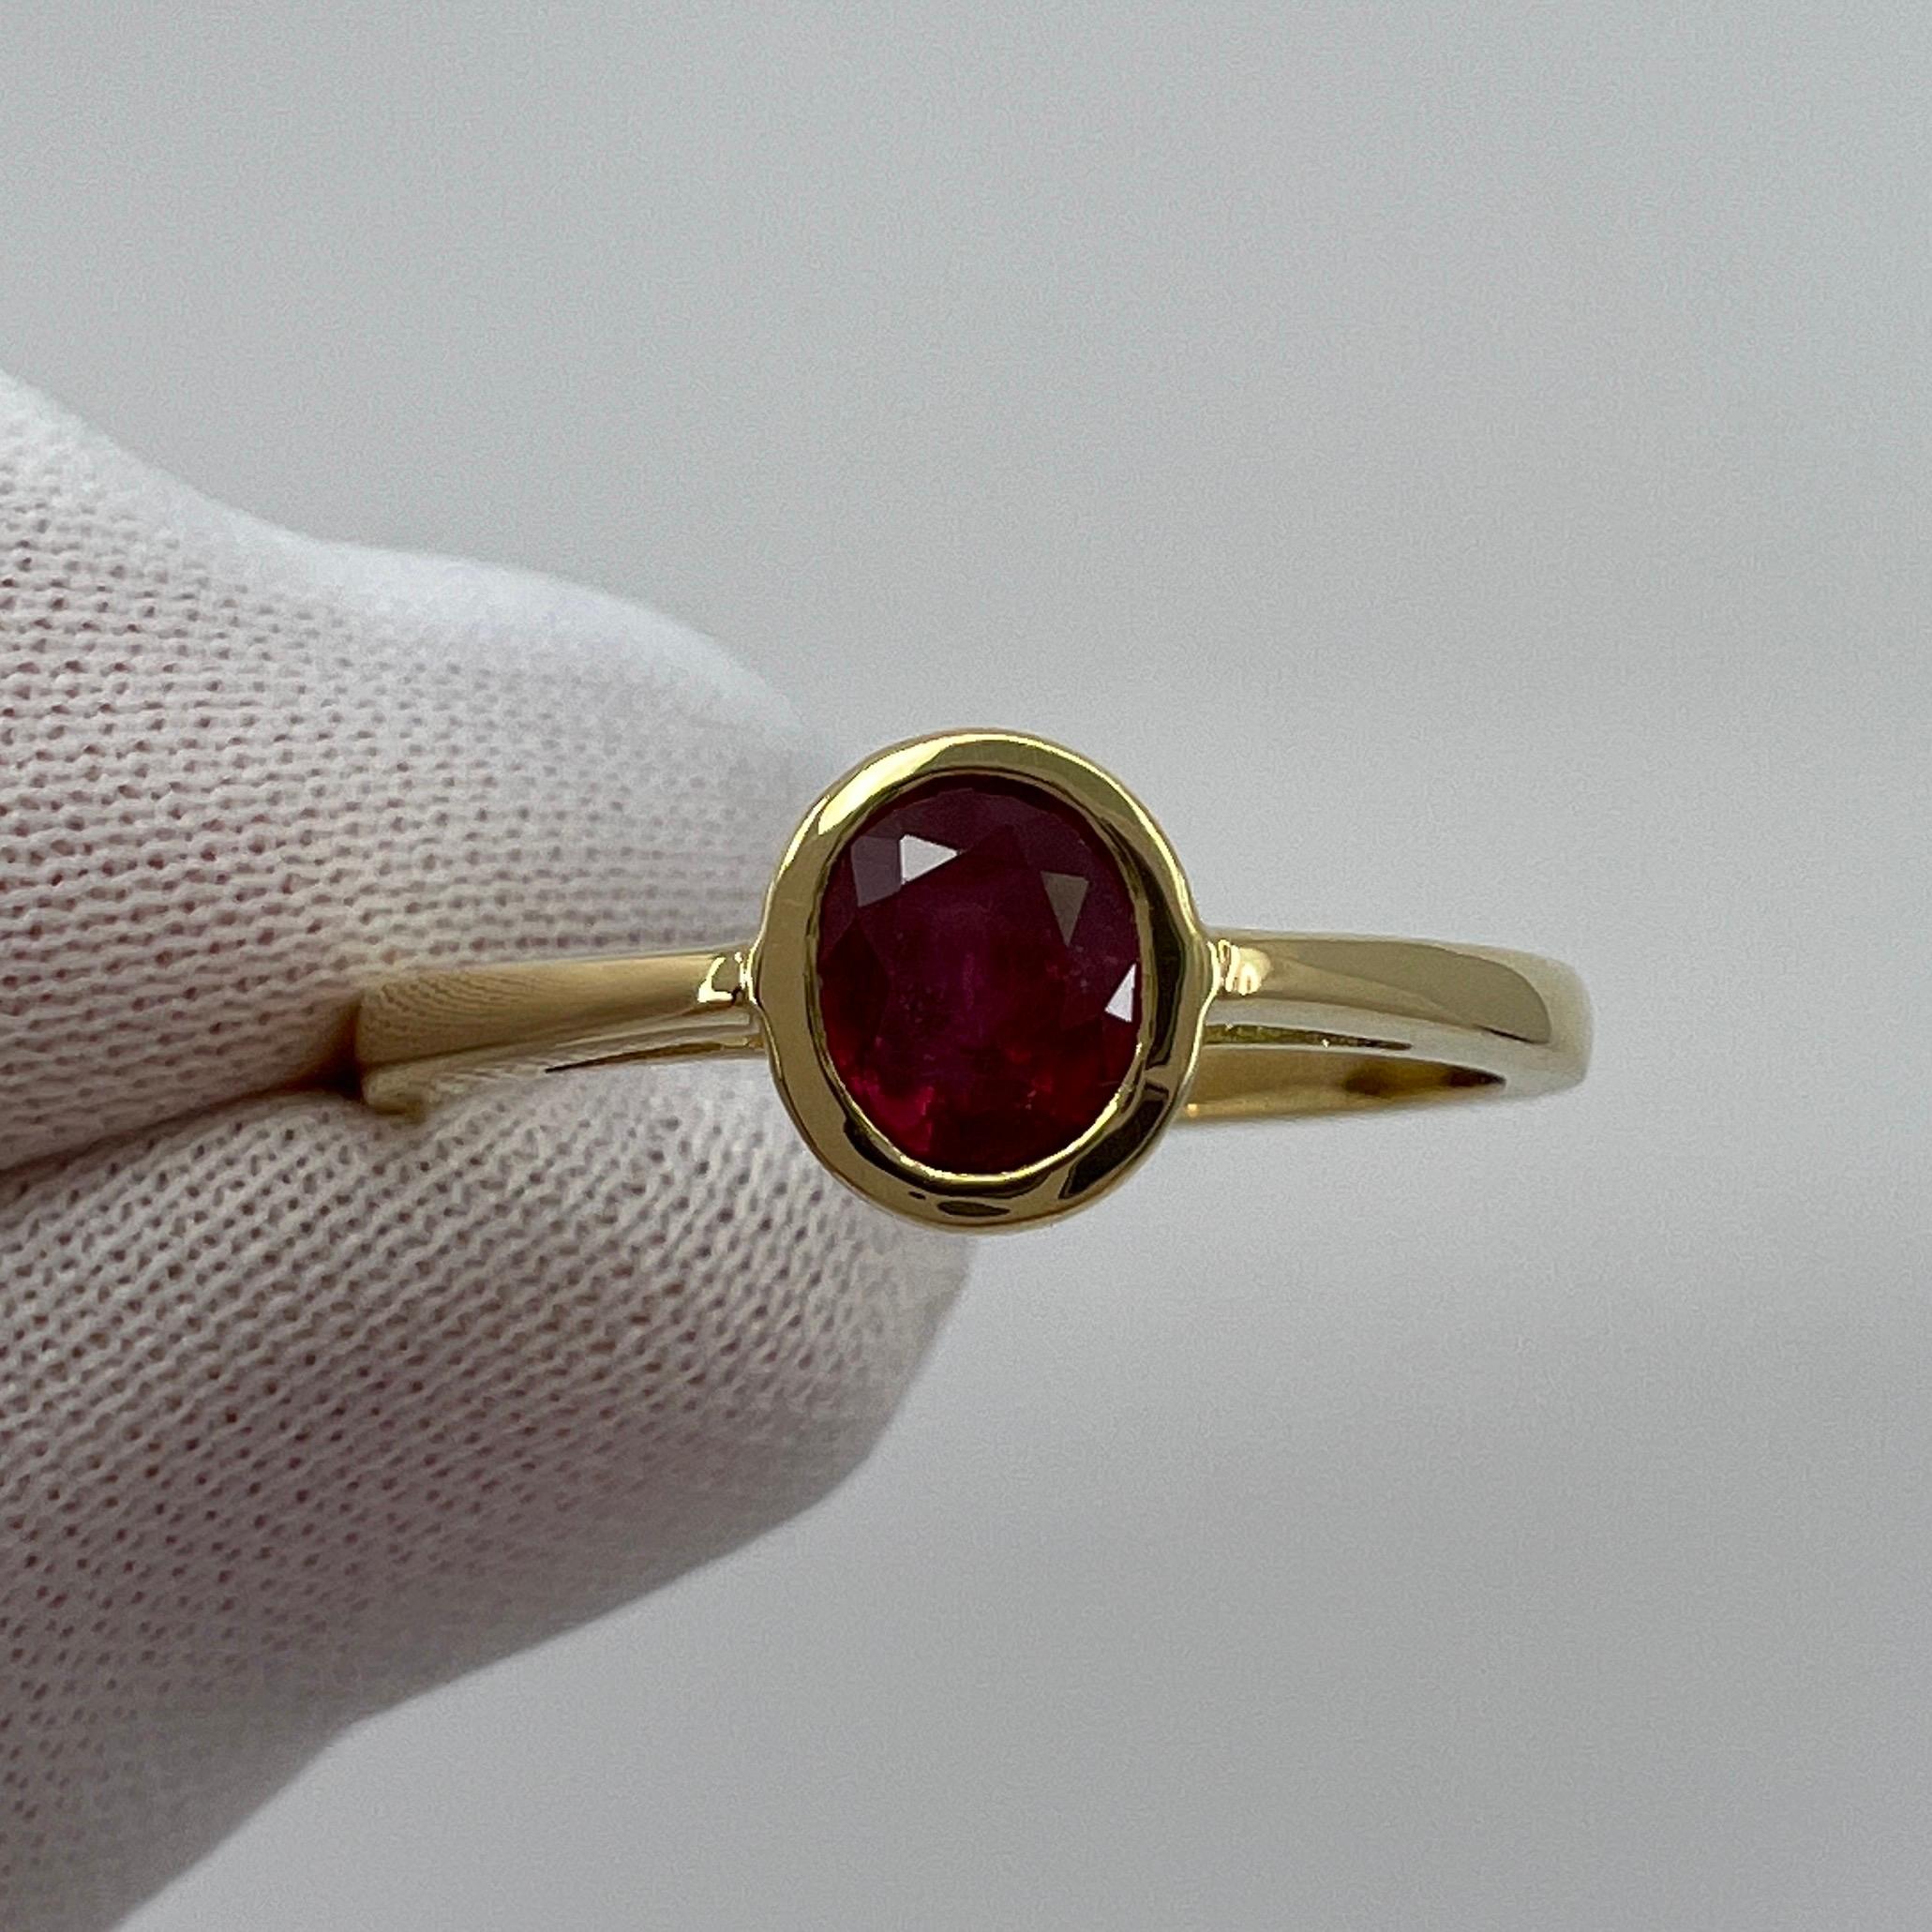 0.75ct Vivid Red Ruby Oval Cut 18k Yellow Gold Bezel Rubover Solitaire Ring For Sale 3